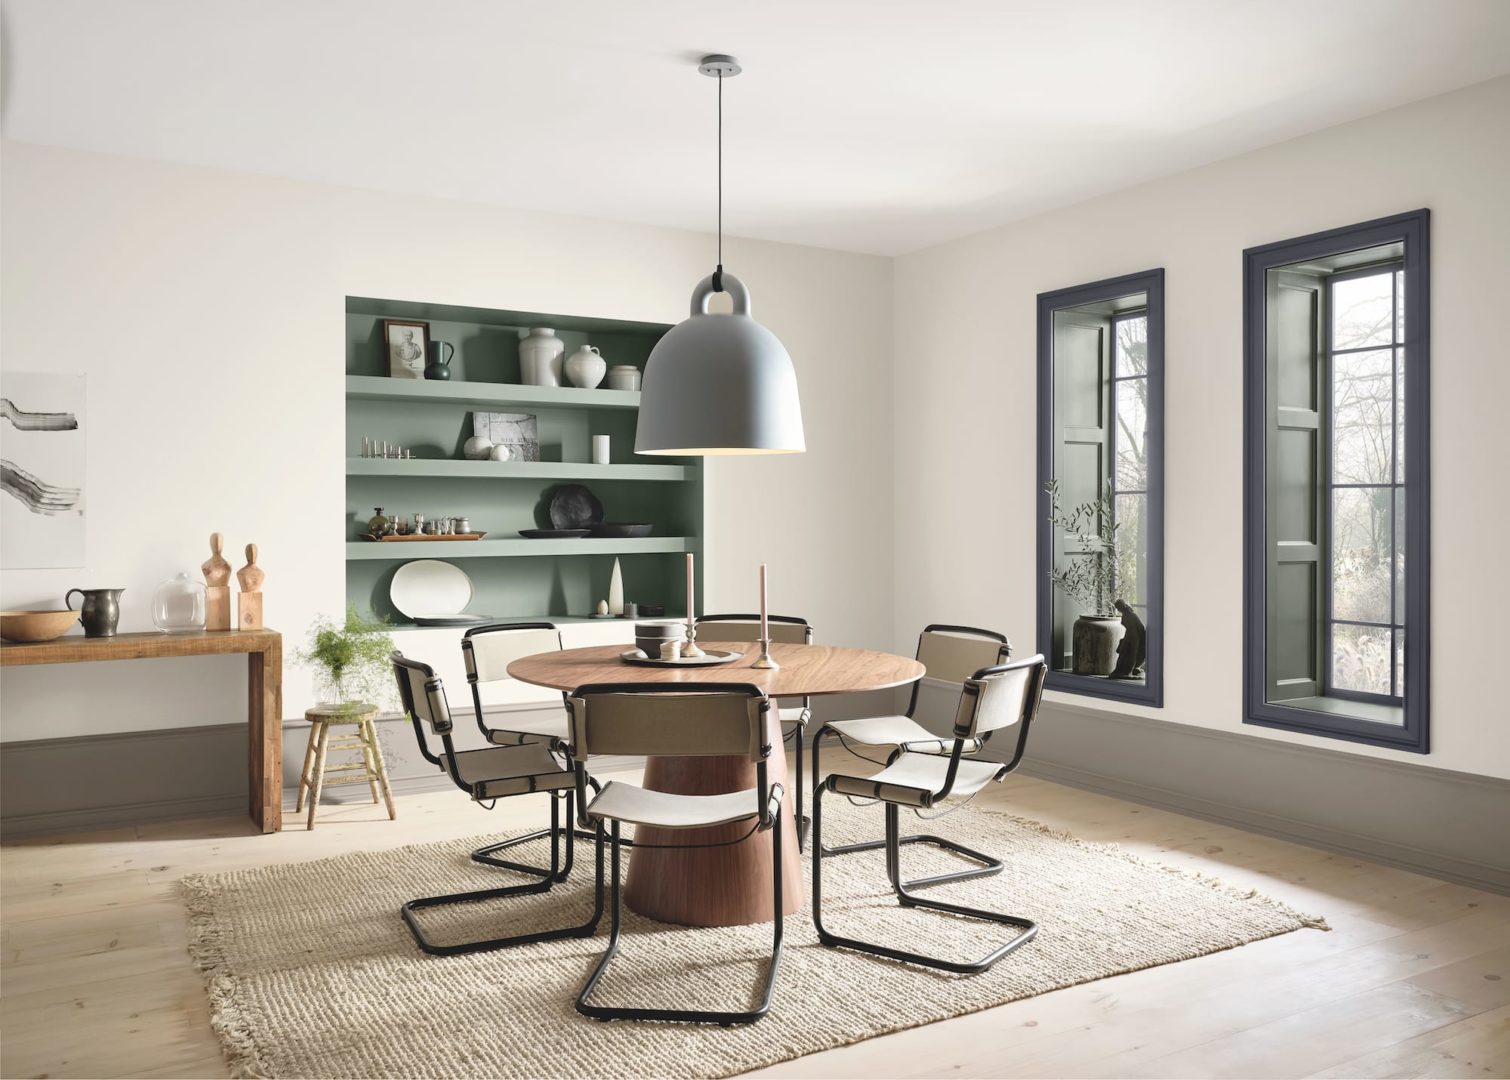 Sherwin Williams Reveals Colormix Trend Forecast For 2020